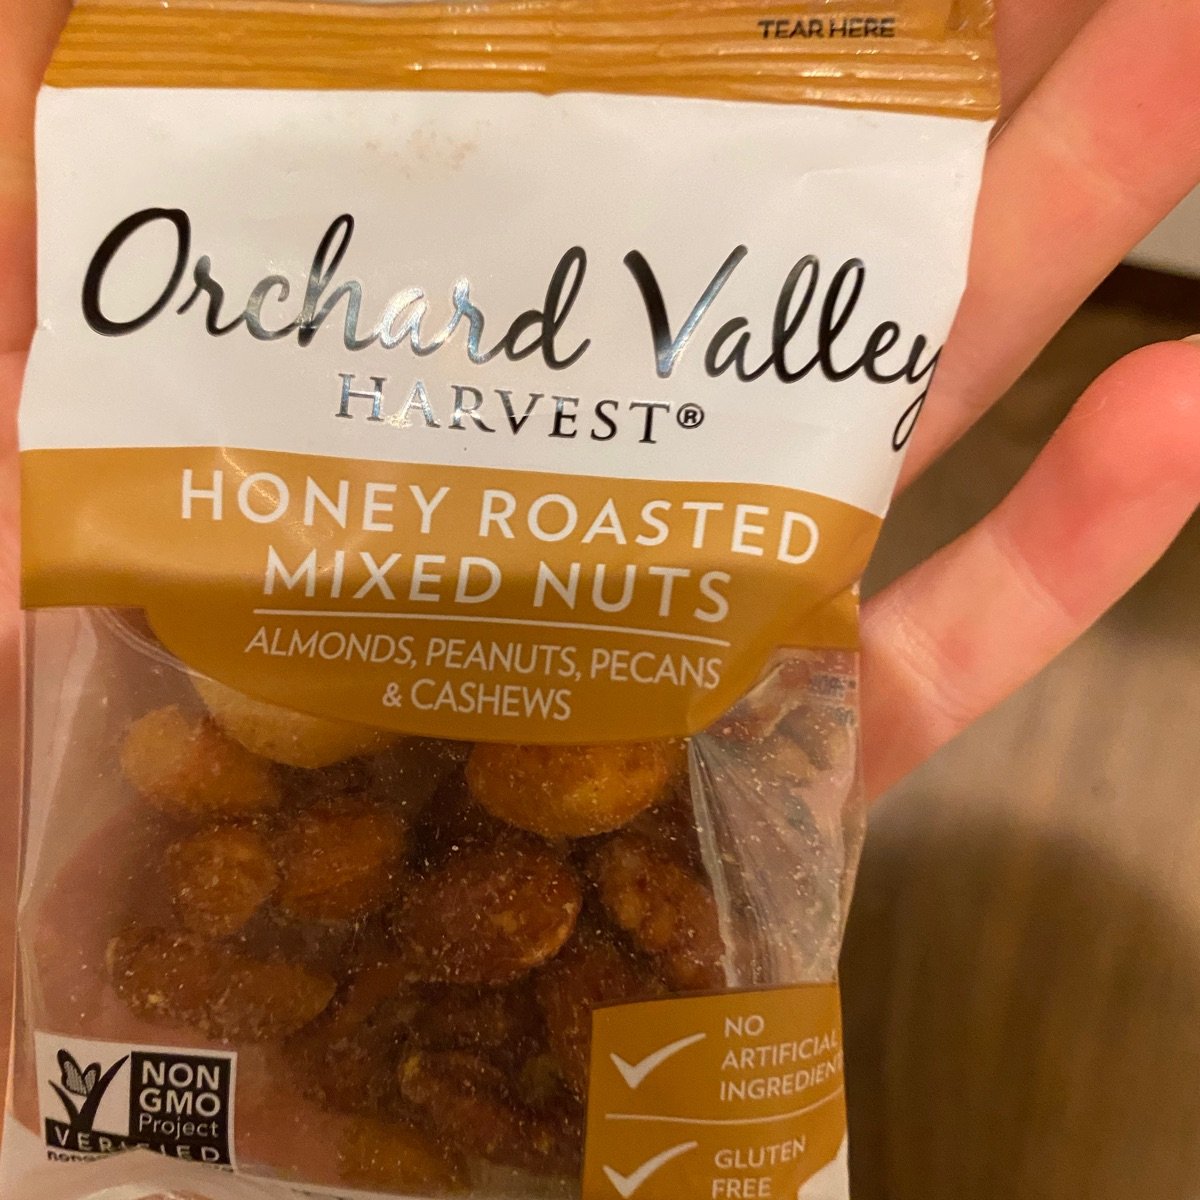 Orchard valley harvest honey roasted mixed nuts Reviews